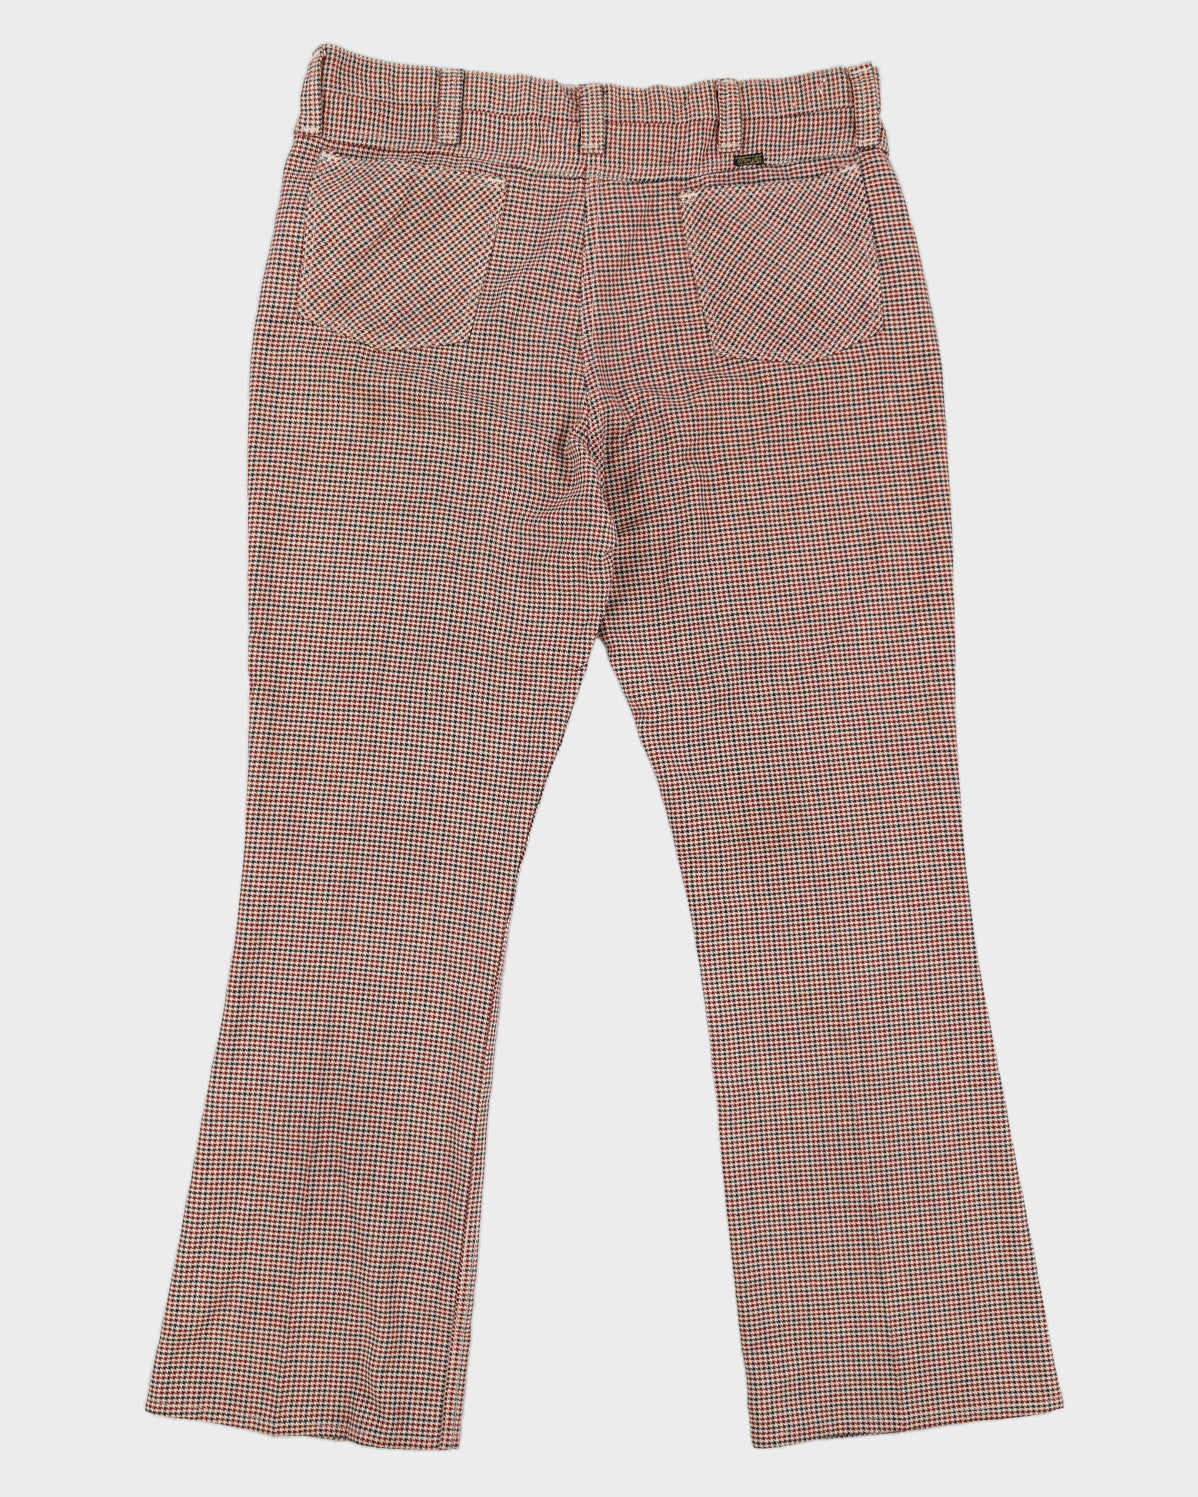 1960s Wrangler Houndstooth Trousers - XL